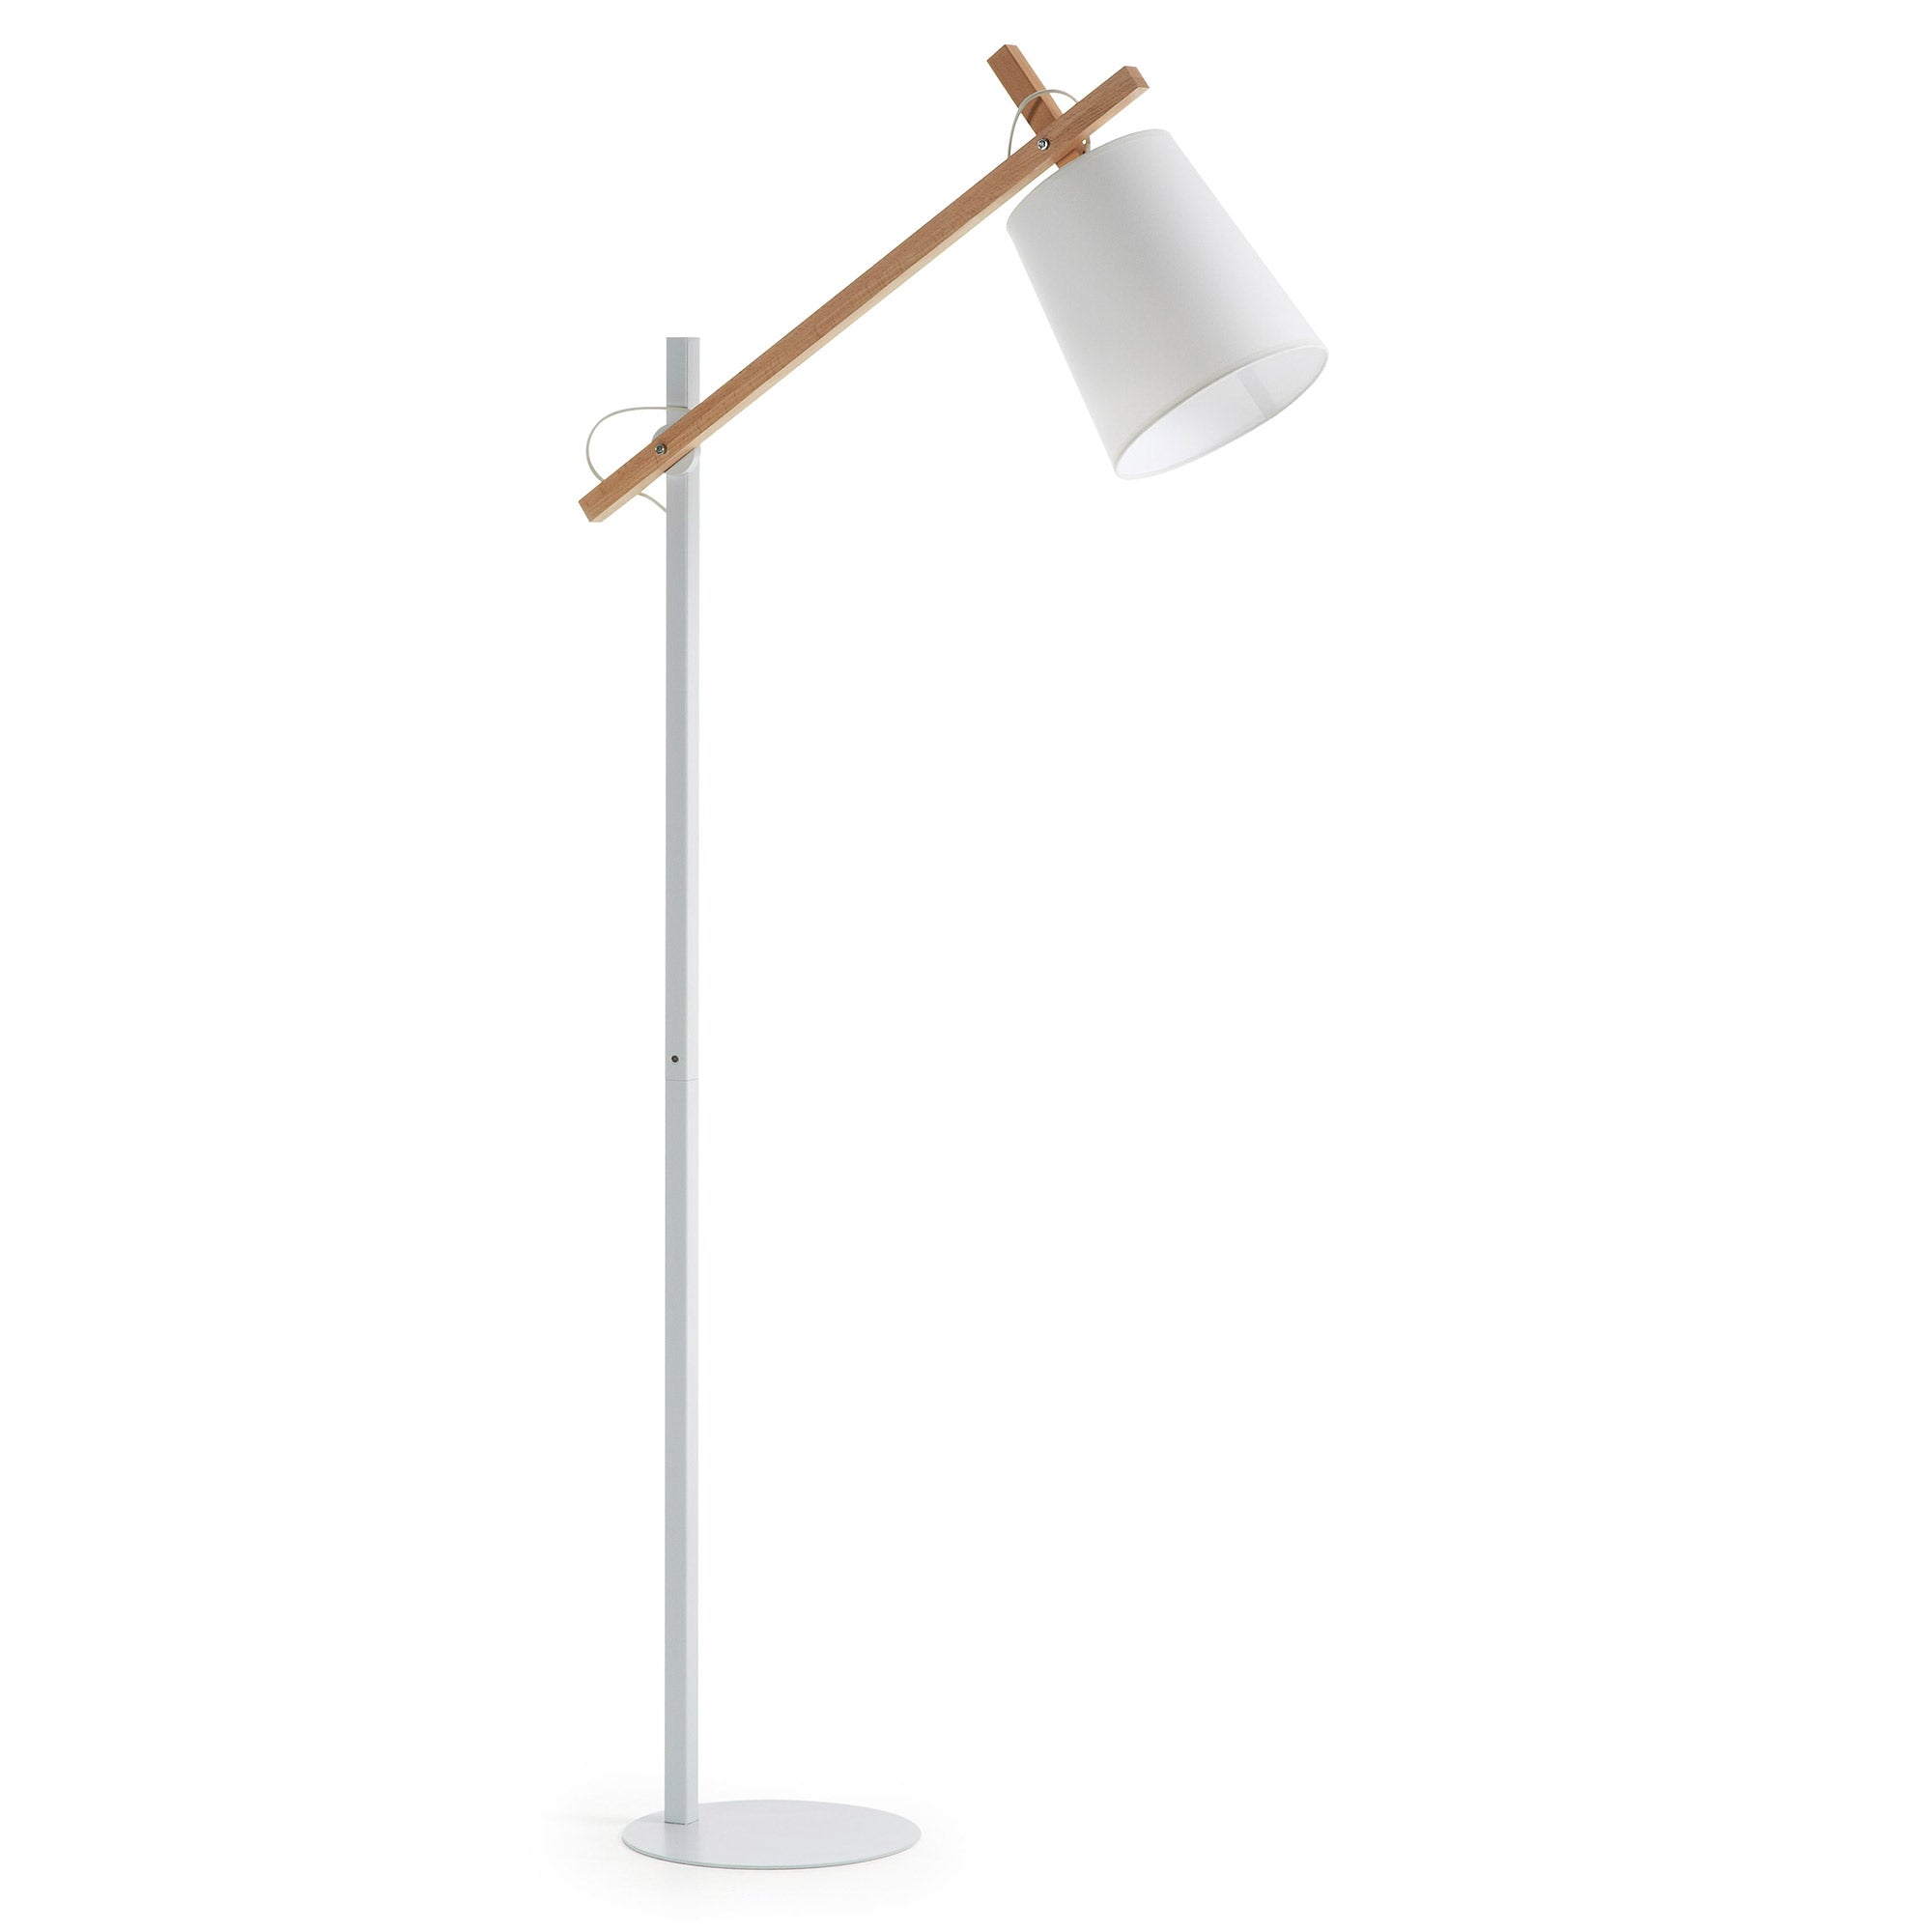 Kosta floor lamp in beech wood and steel with white finish